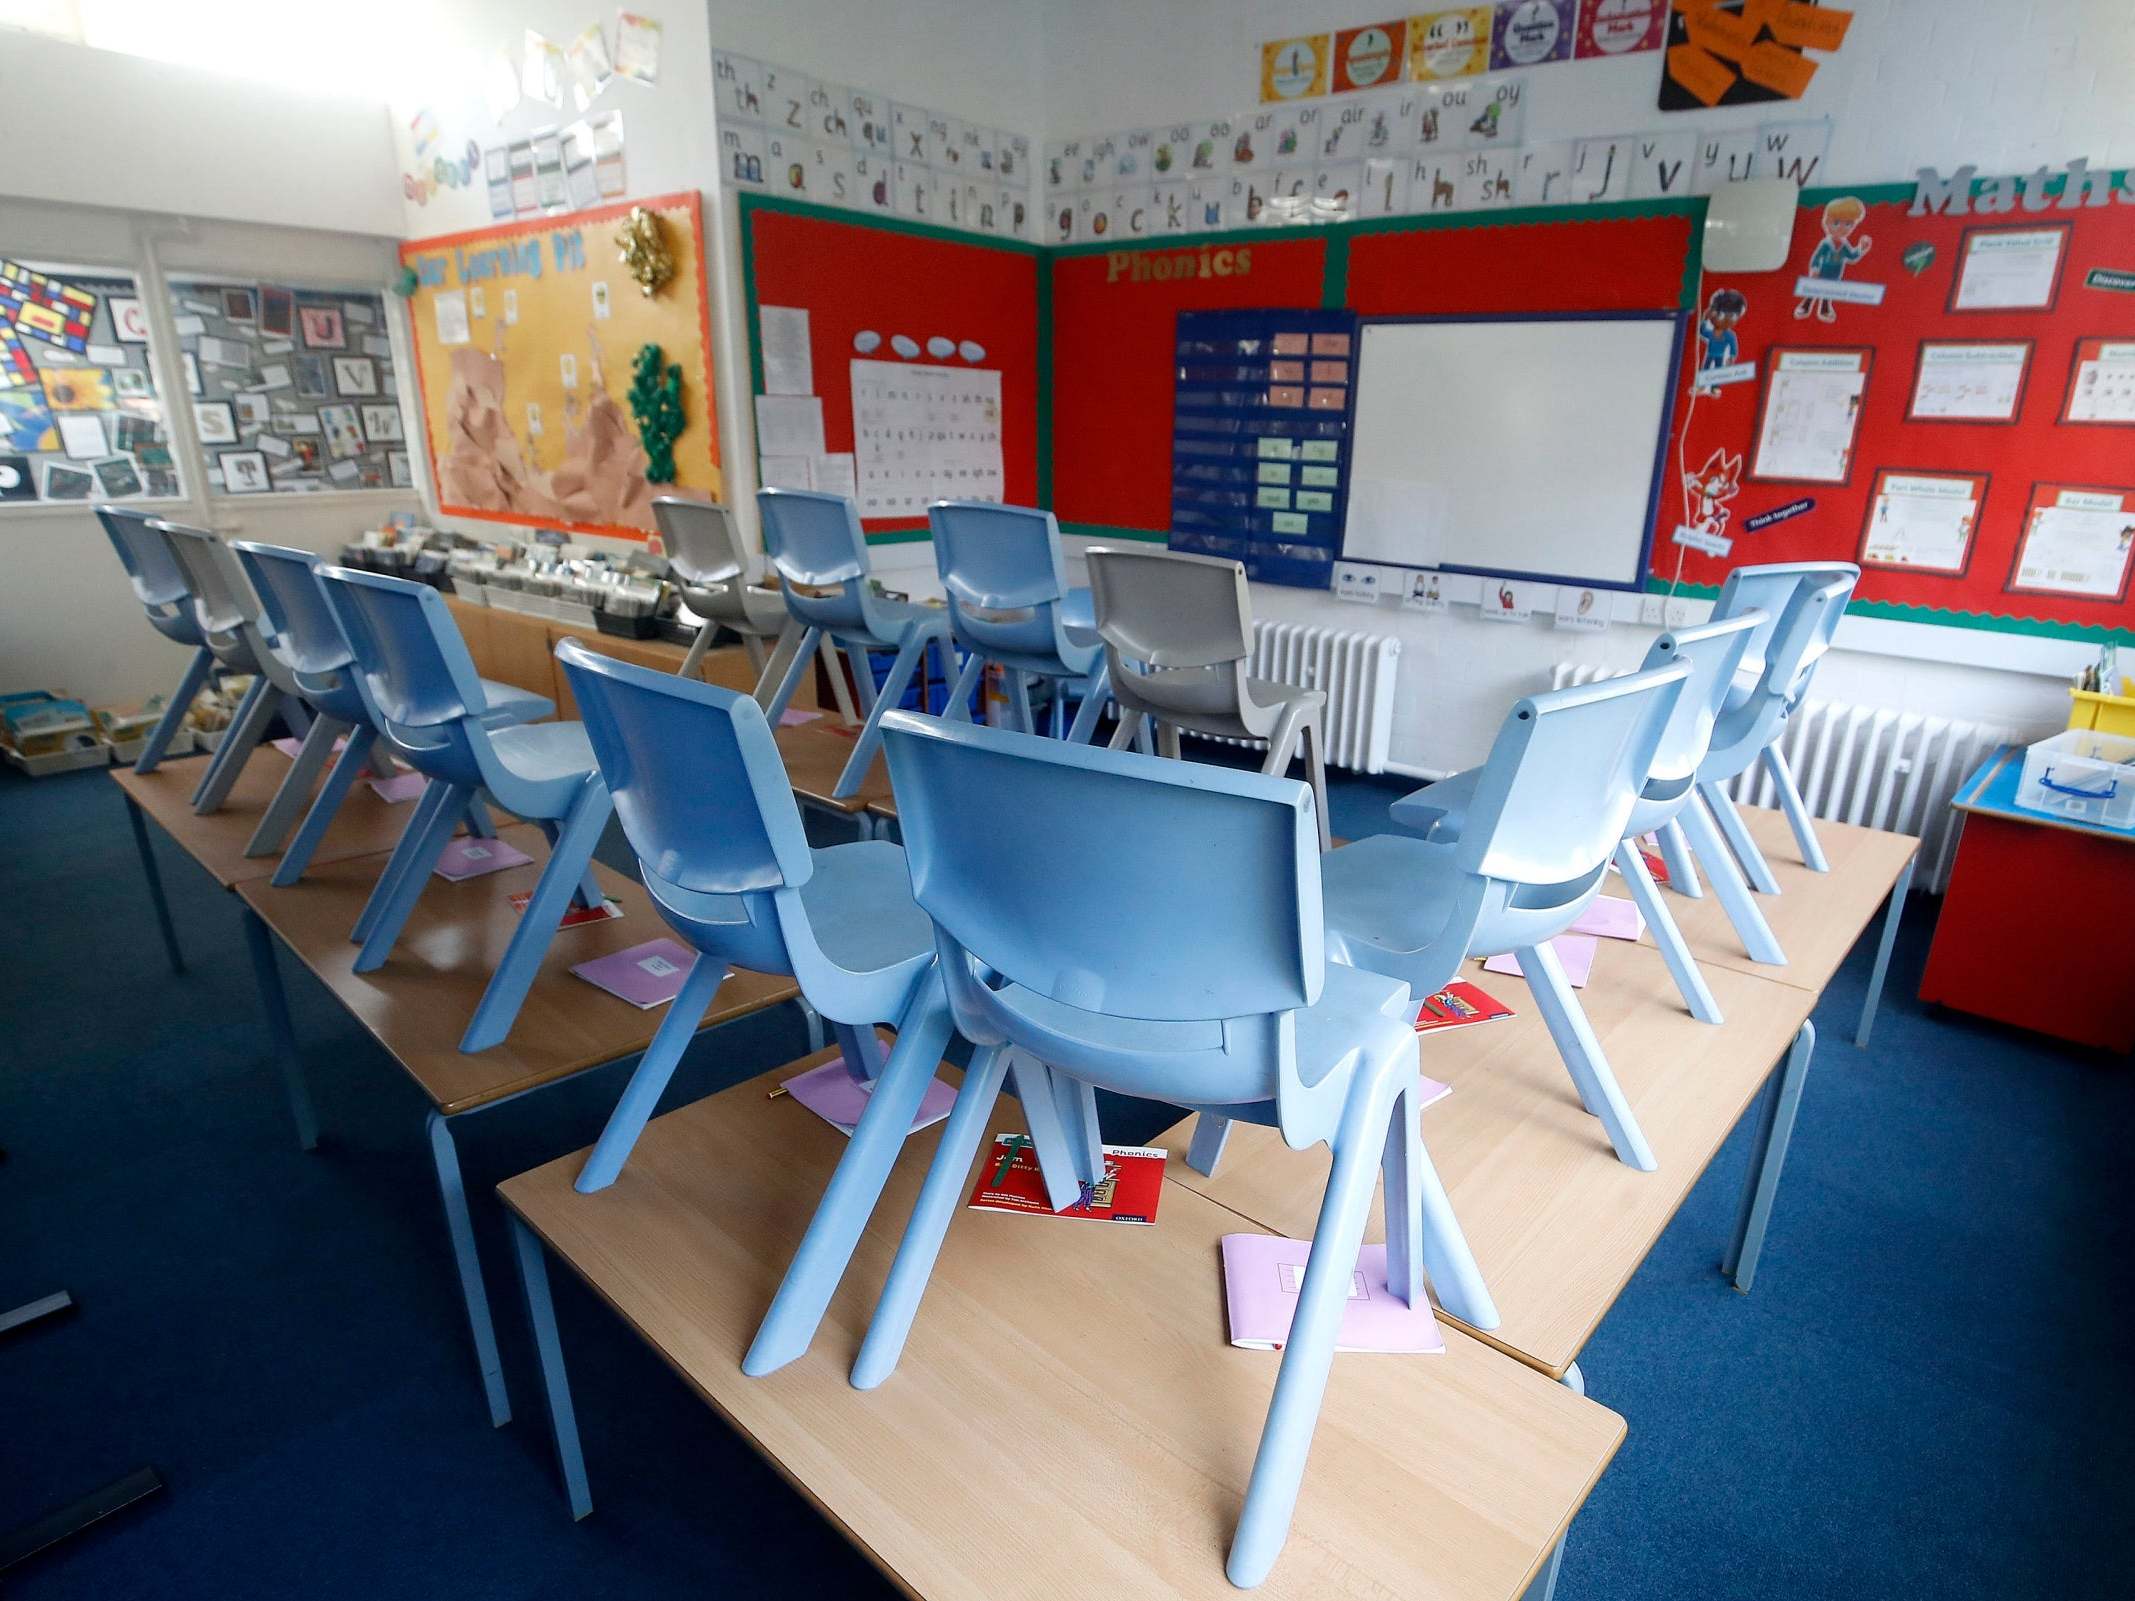 Councils in Liverpool and Hartlepool say they will not reopen primary schools to children in reception classes and years 1 and 6 at the start of June as proposed